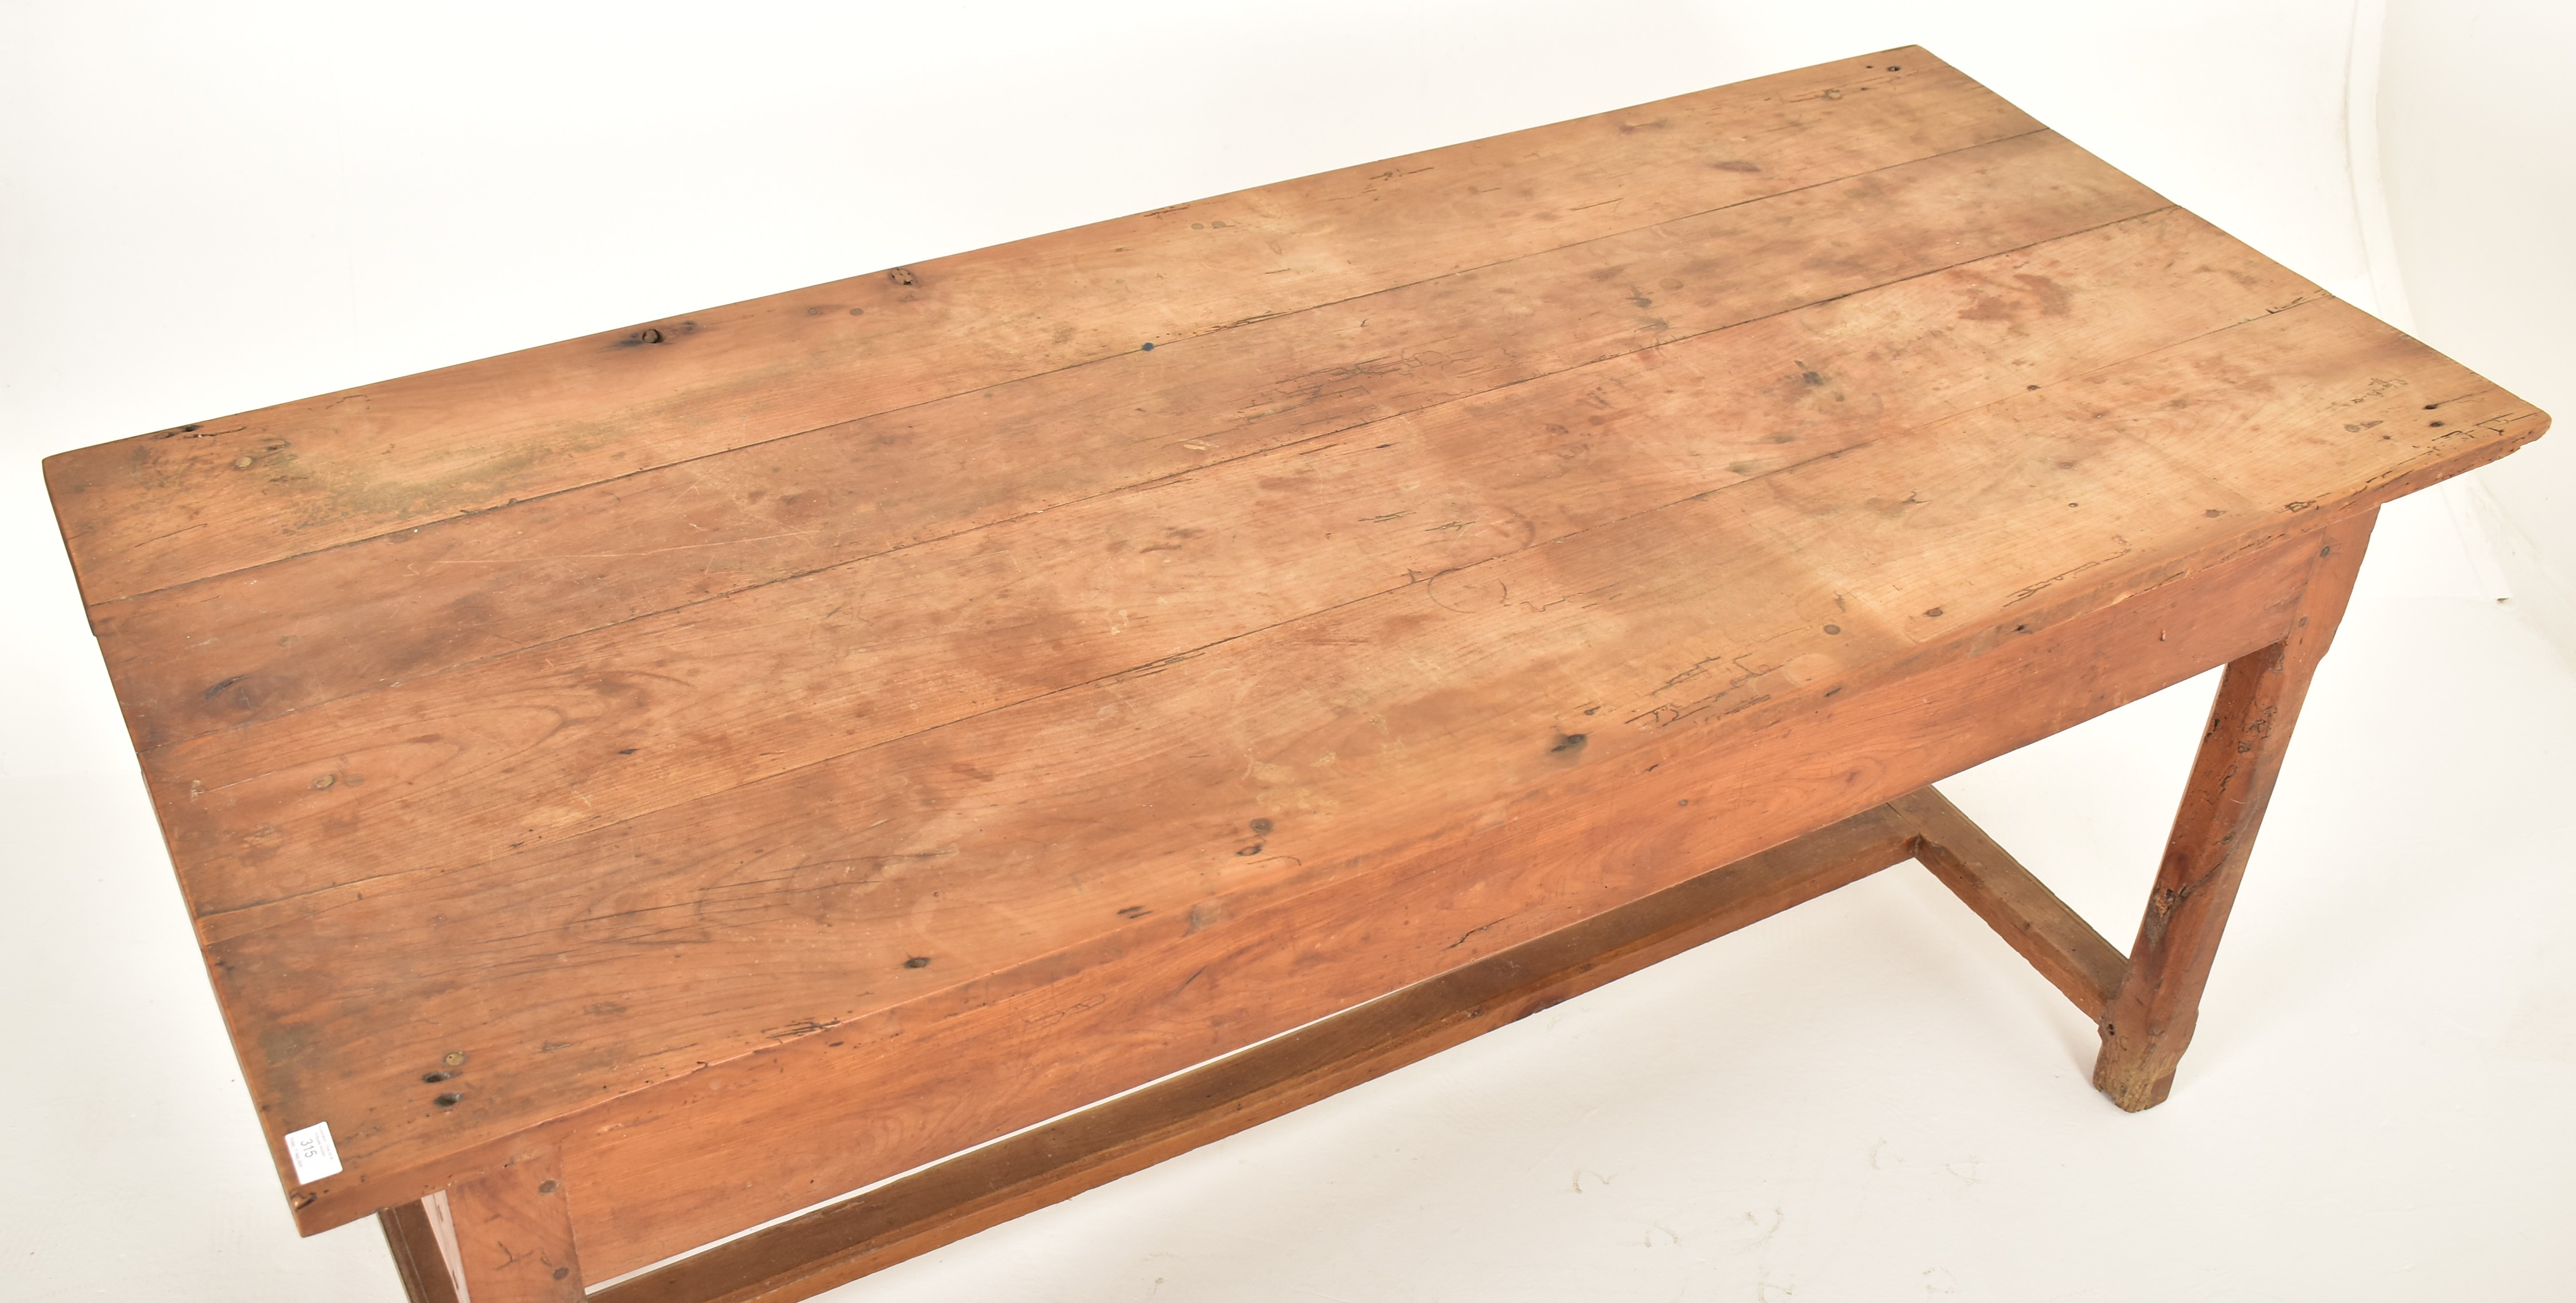 19TH CENTURY FRENCH CHESTNUT WOOD REFECTORY DINING TABLE - Image 2 of 6